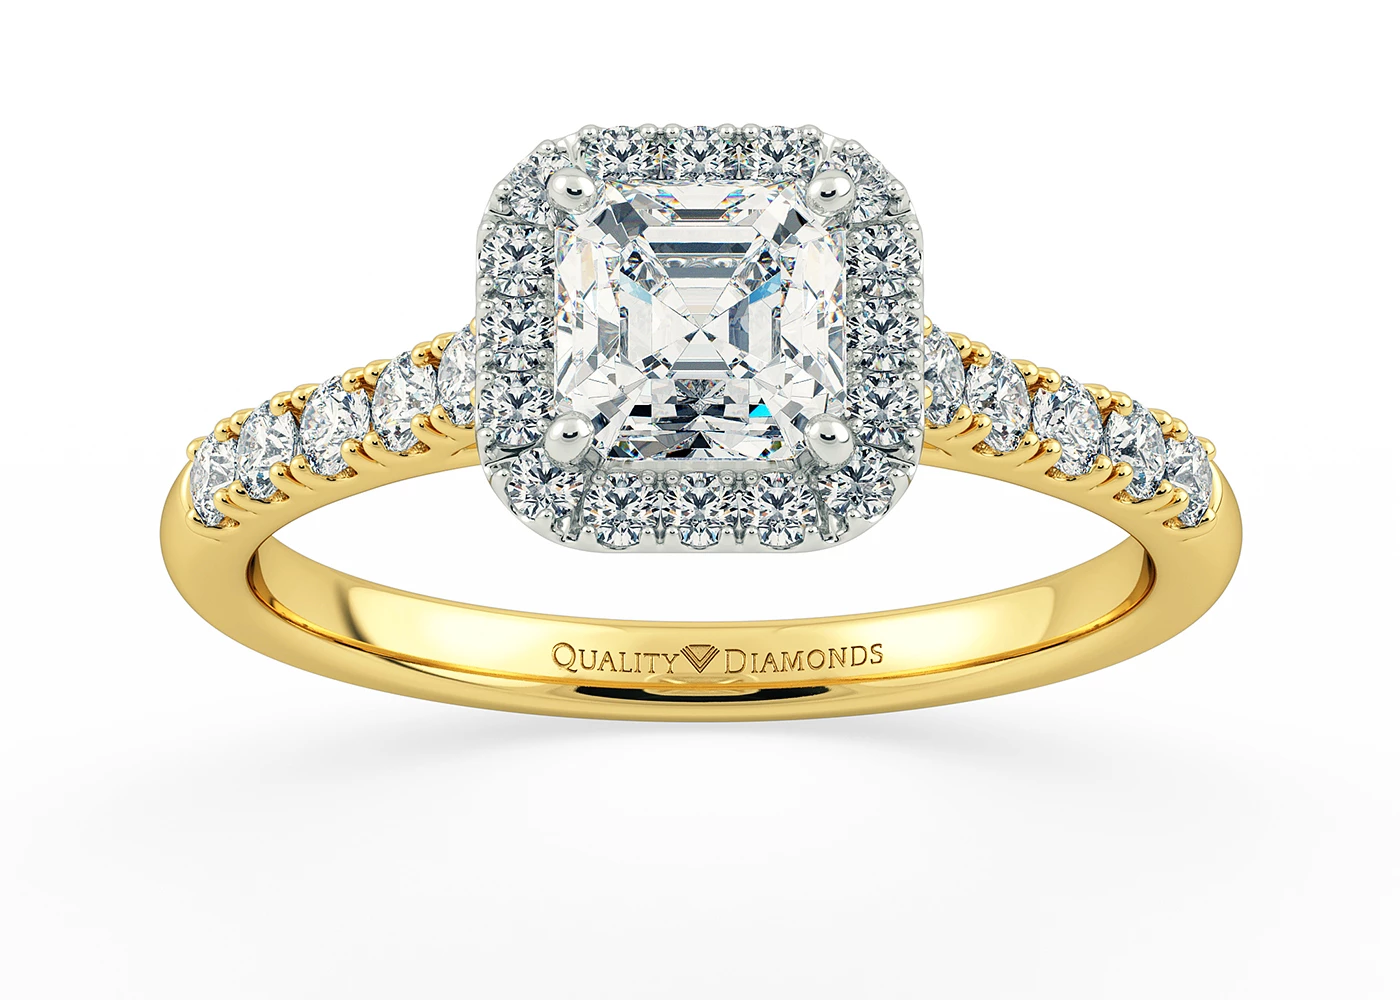 One Carat Asscher Halo Diamond Ring in 18K Yellow Gold